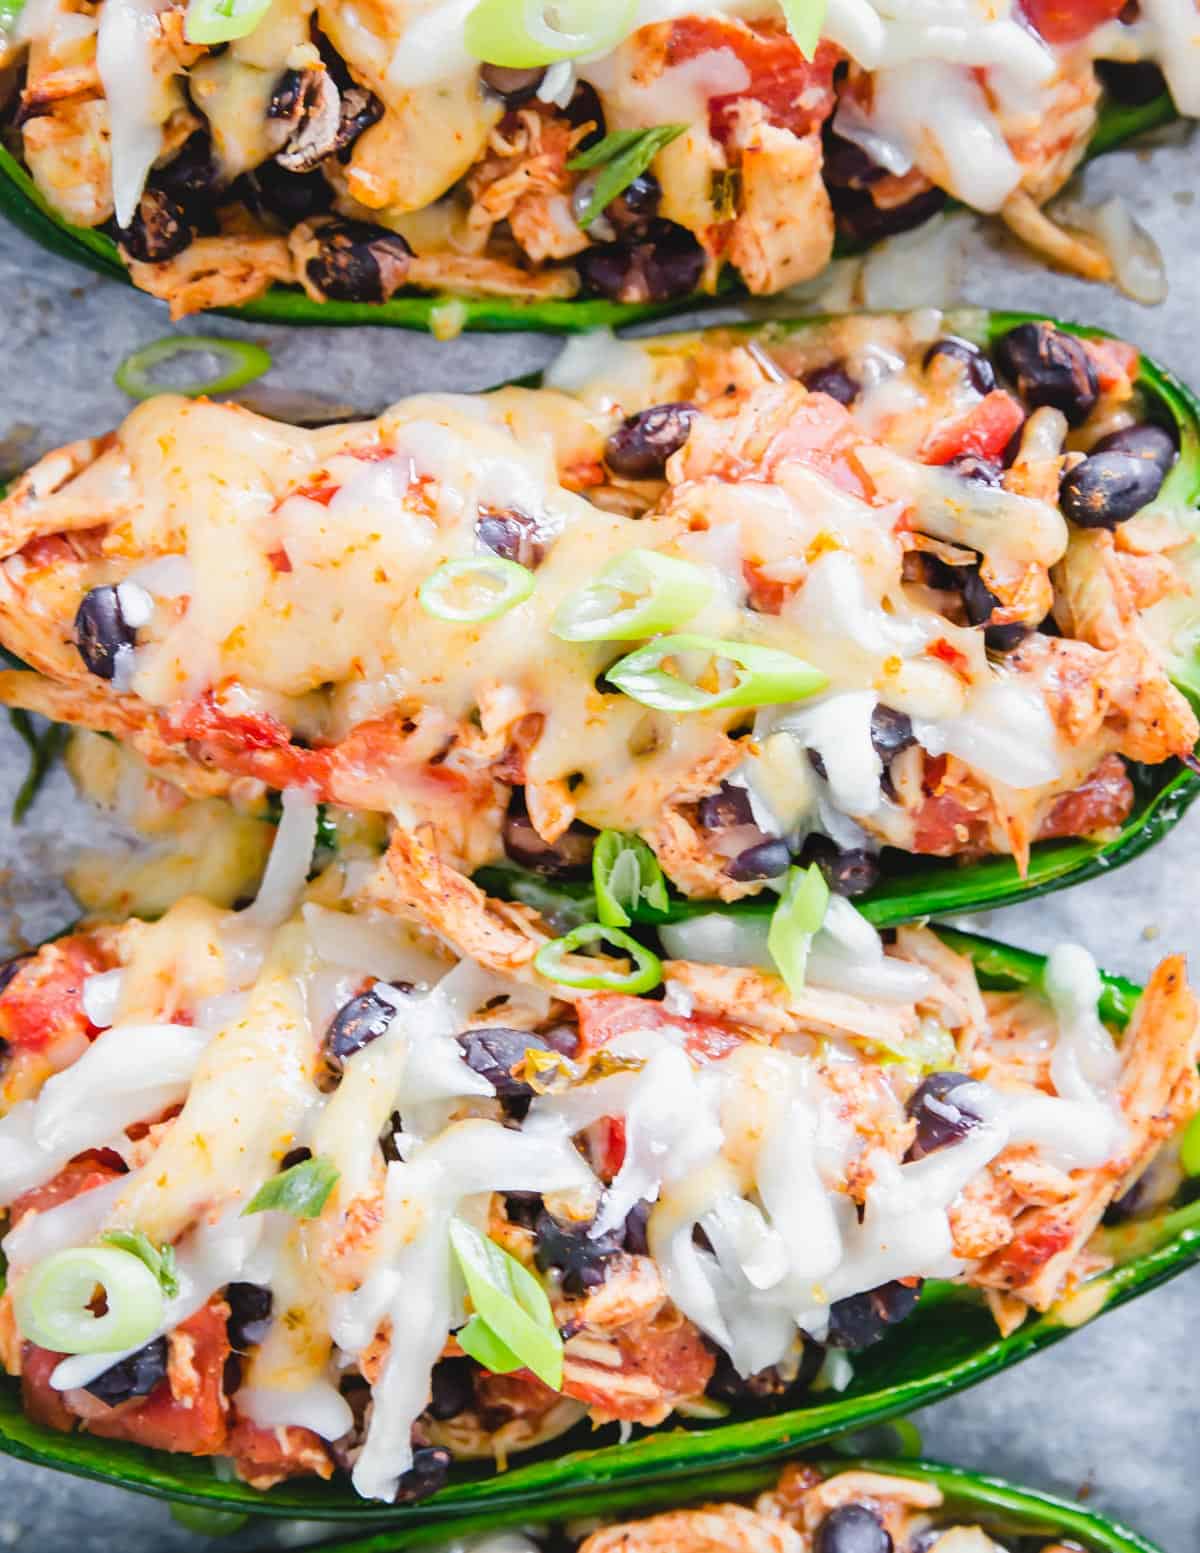 Enjoy these cheesy stuffed poblano peppers as a gluten-free, comforting and easy meal!